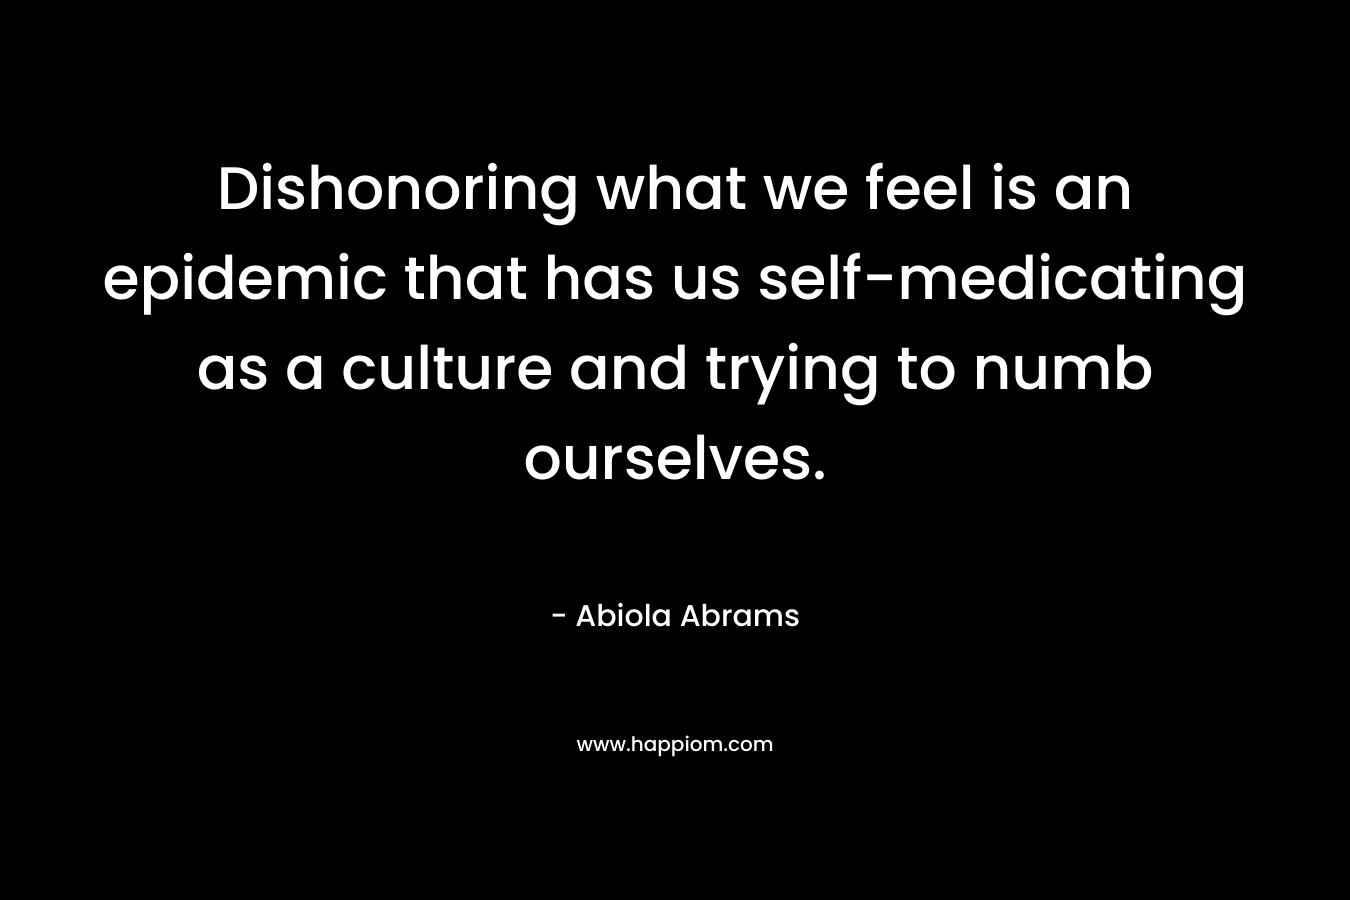 Dishonoring what we feel is an epidemic that has us self-medicating as a culture and trying to numb ourselves. – Abiola Abrams